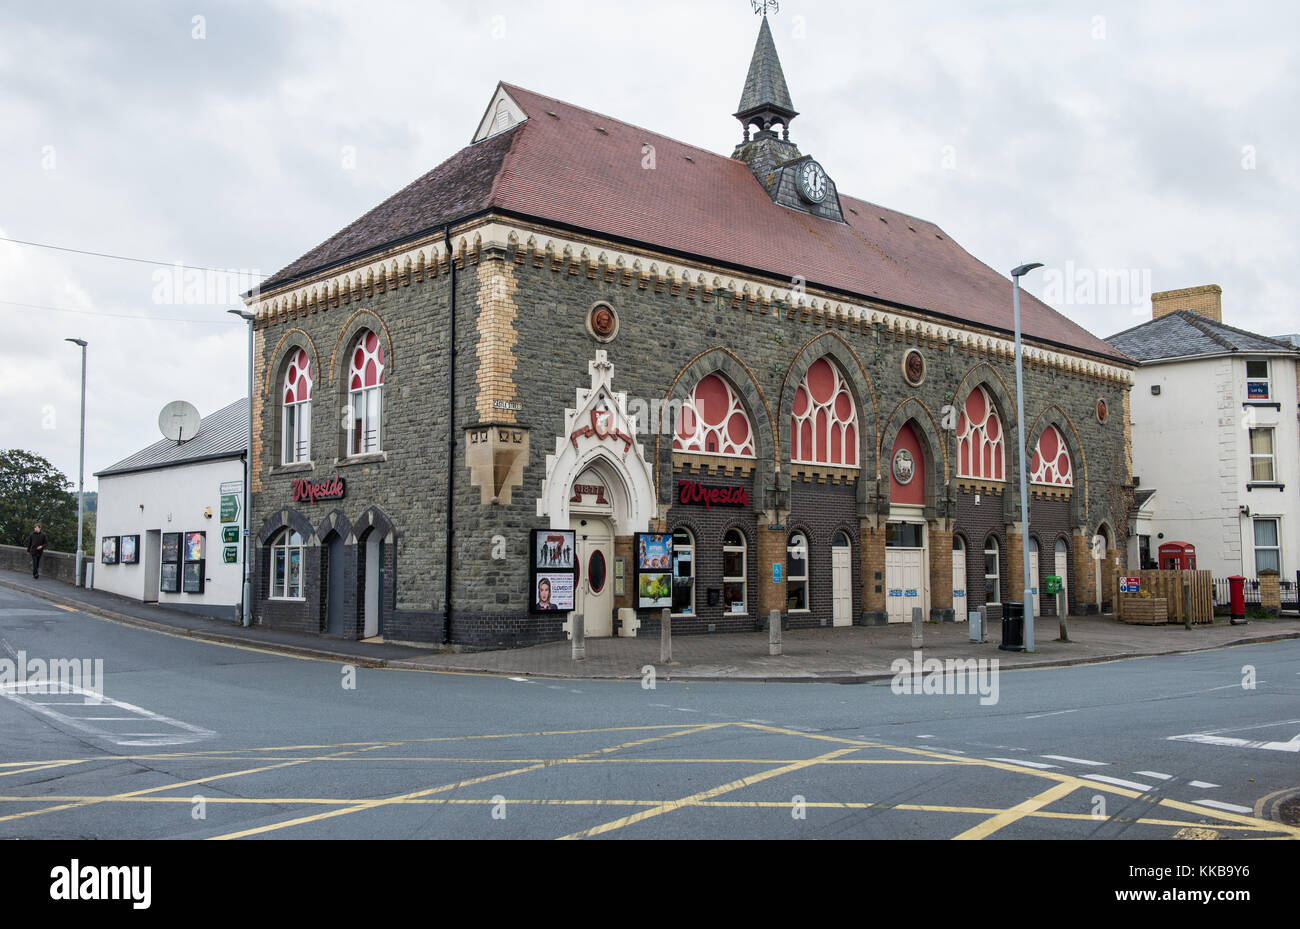 Wyeside arts centre and cinema in Castle Street, Builth Wells, Powys, Wales. UK. Stock Photo